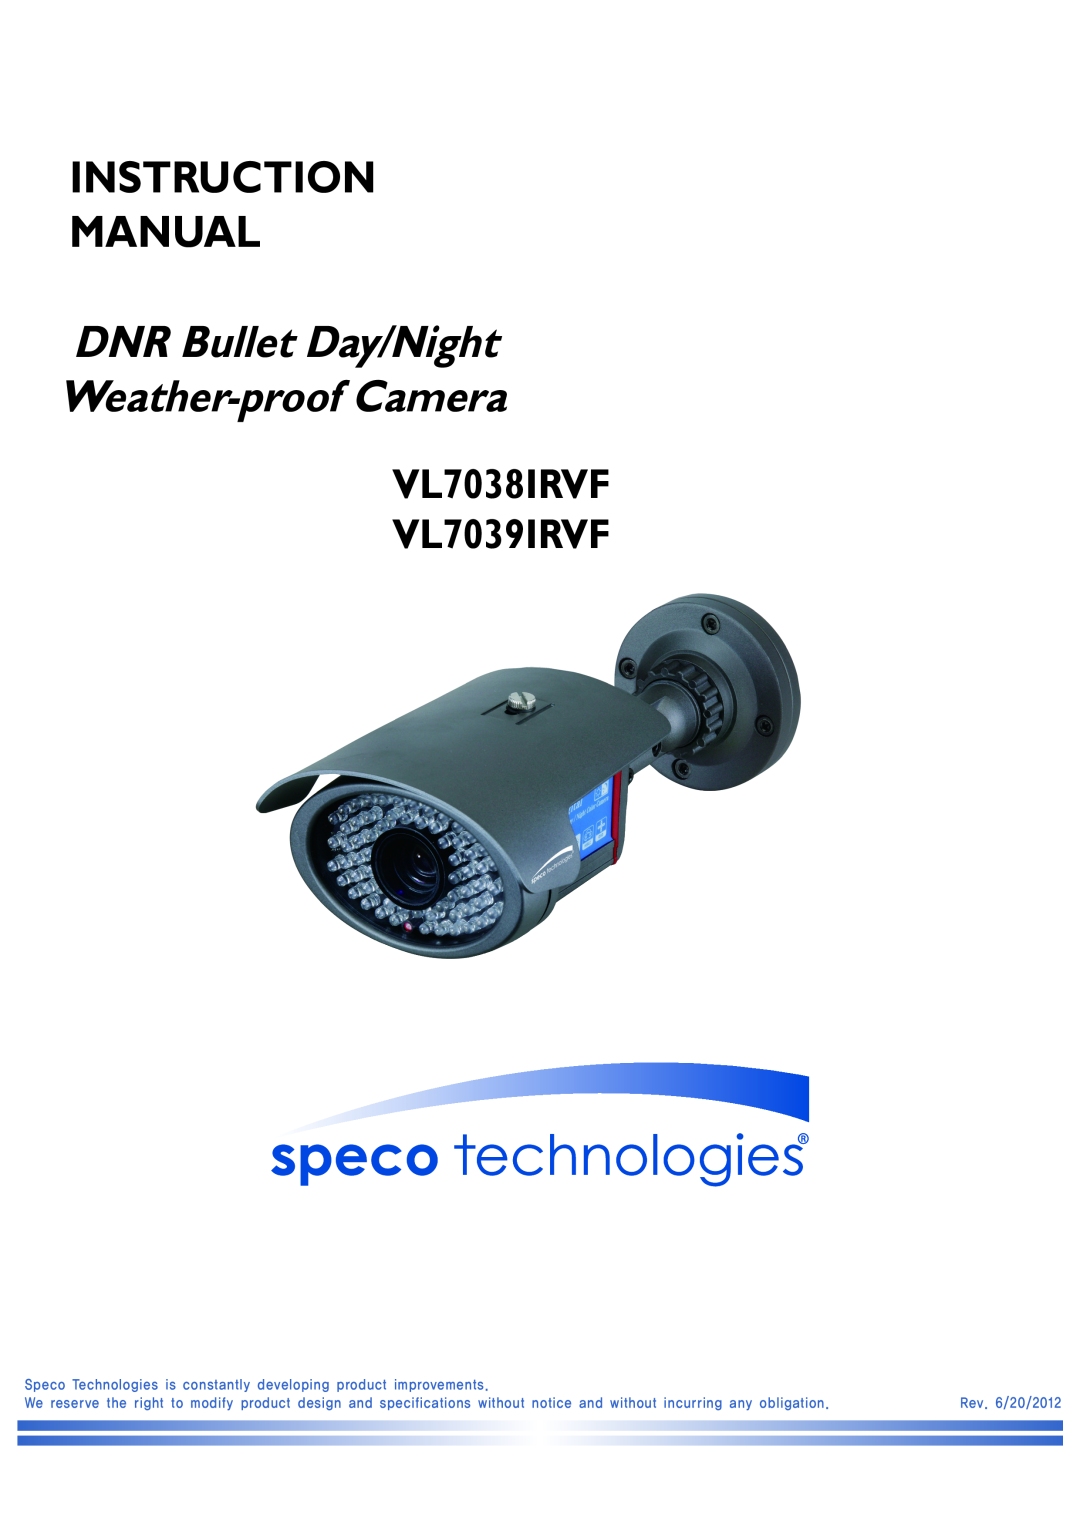 Speco Technologies VL7038IRVF dimensions Day/Night, Weather Resistant Color, Bullet Cameras/63 IR LEDs, Features, IR Range 